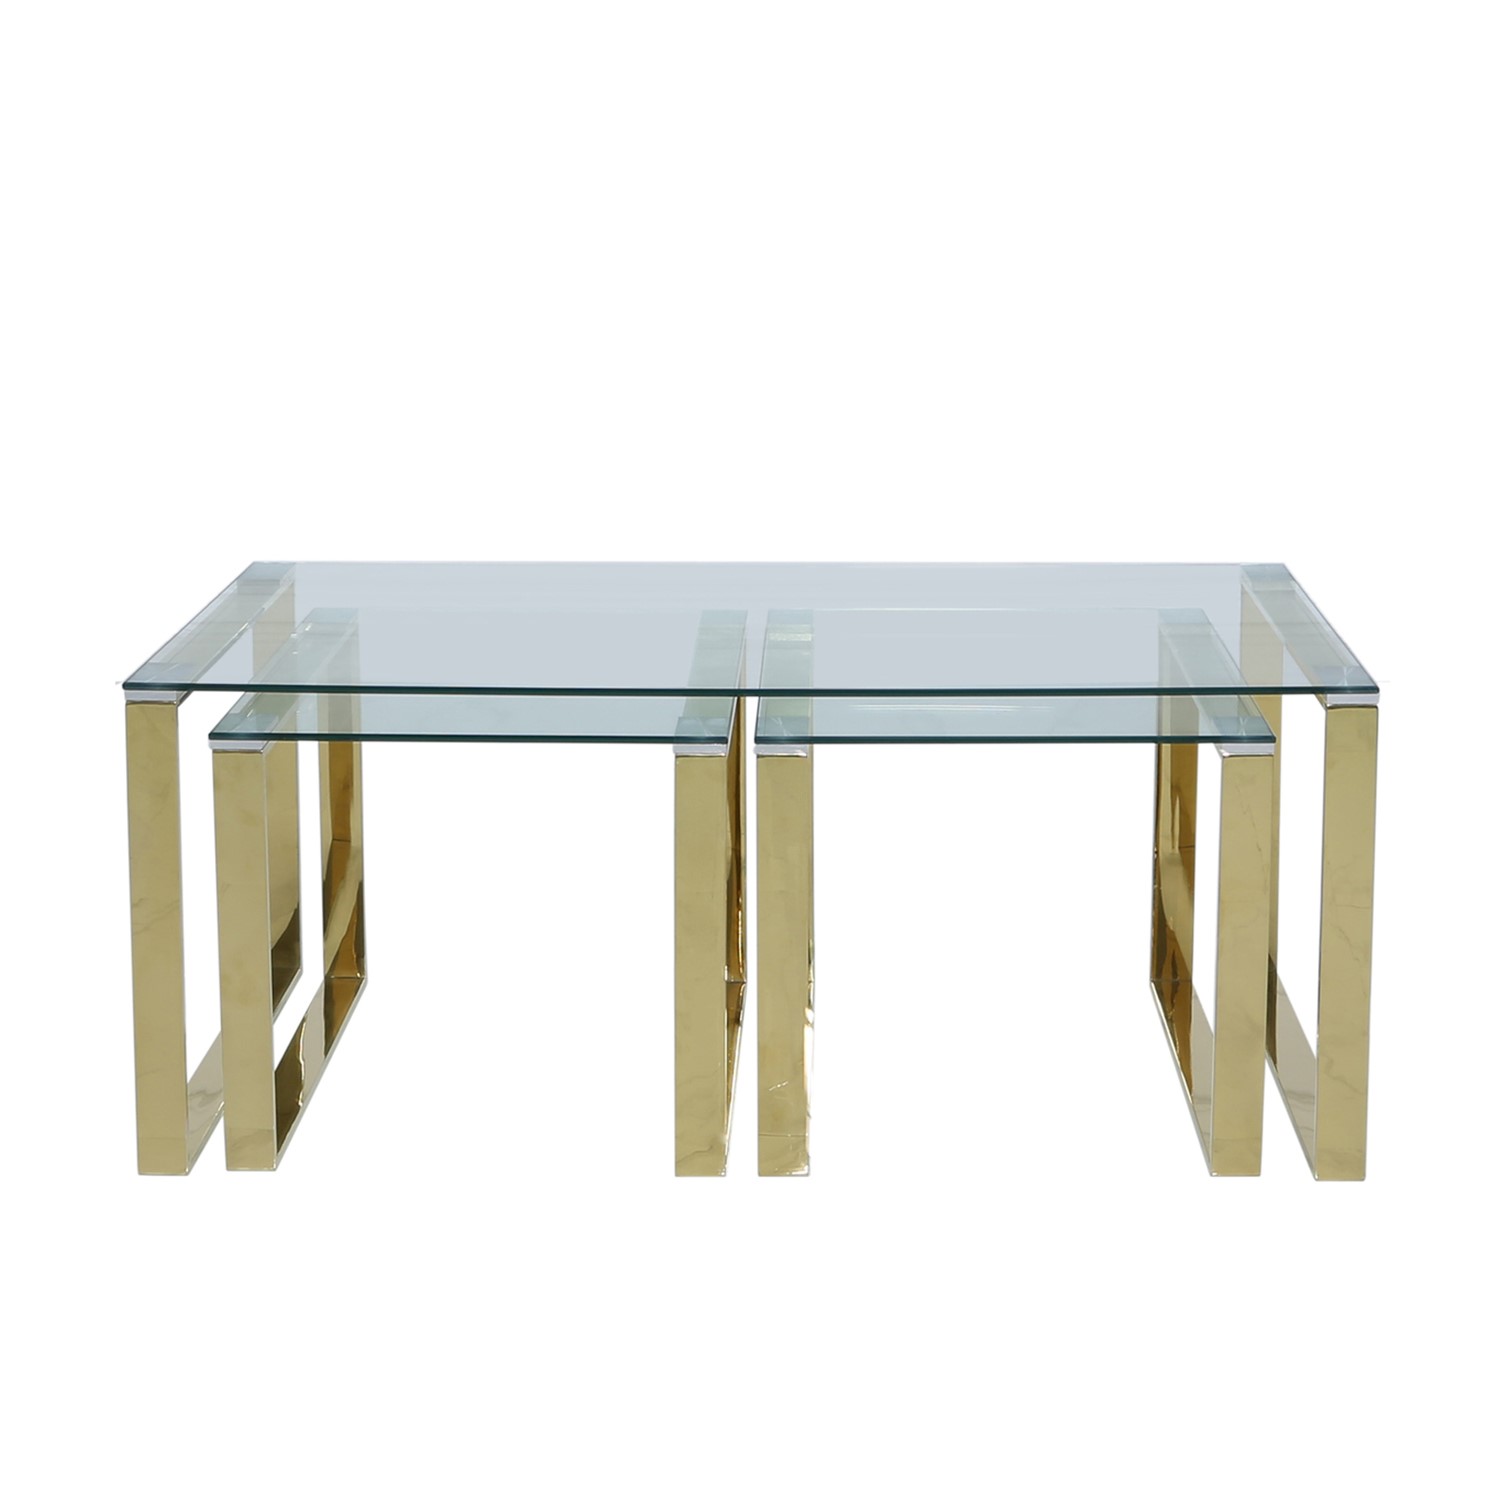 Photo of Aurora boutique amelia coffee table and side table set